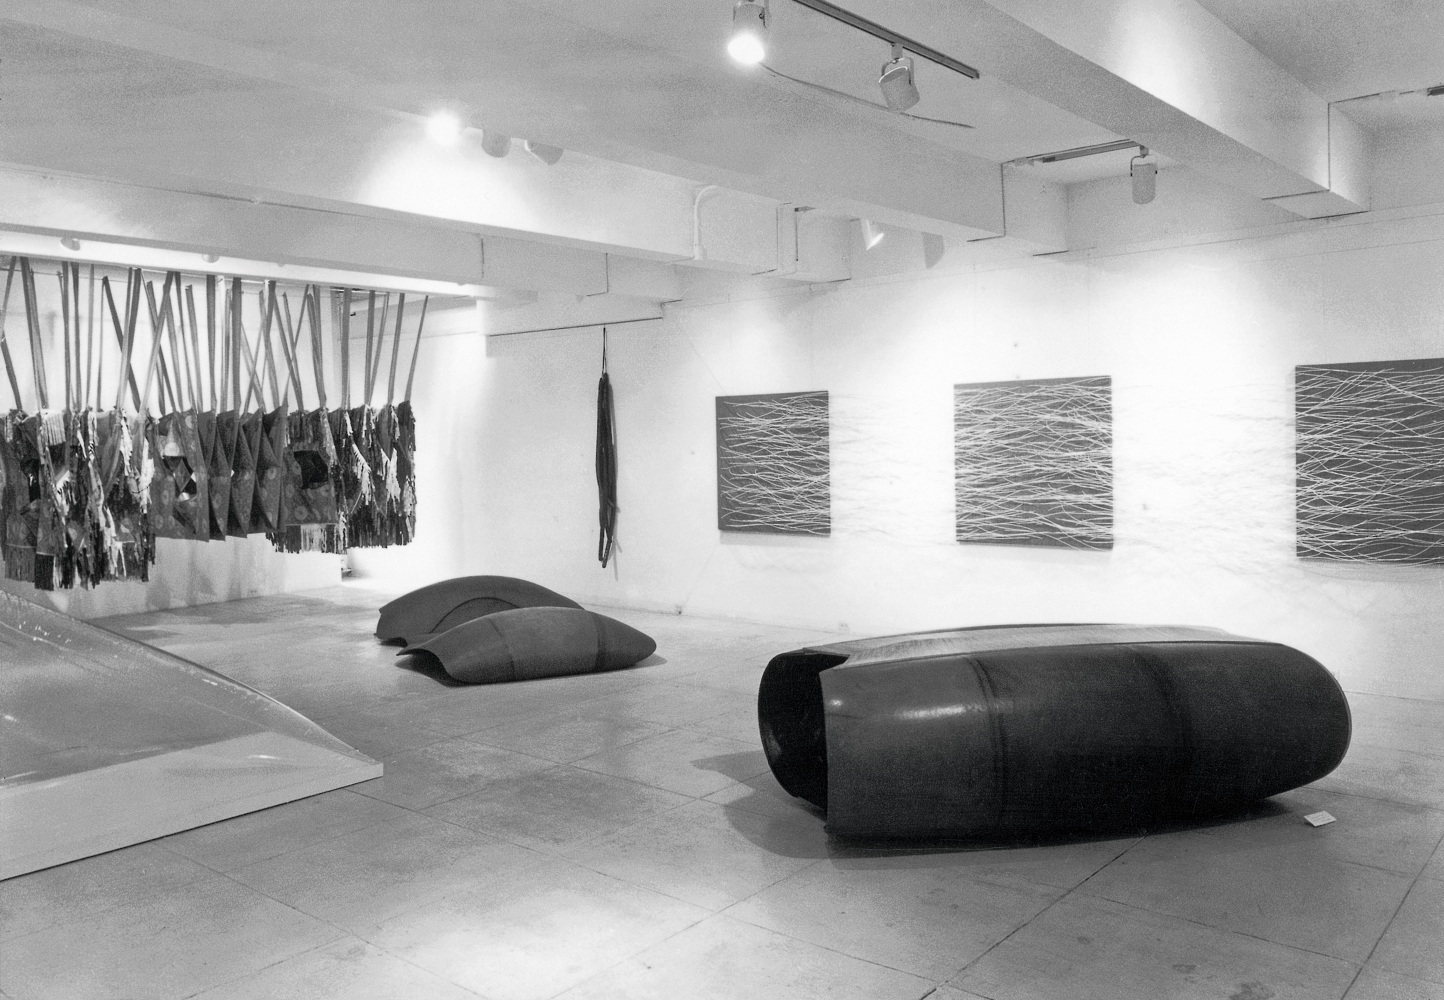 [FIG. 8]

Eva Hesse&amp;rsquo;s Several, 1965, and Metronomic Irregularity II, 1966 (both on back wall) in Eccentric Abstraction at
Fischbach Gallery, 1966
Image&amp;nbsp;courtesy The Estate of Eva Hesse.
Courtesy Hauser &amp;amp; Wirth.
Works by the following artists also featured in exhibition installation image: Don Potts, Frank Lincoln, and Keith Sonnier. Art by Keith Sonnier &amp;copy; 2020 Keith Sonnier / Artists Rights Society (ARS), New York.